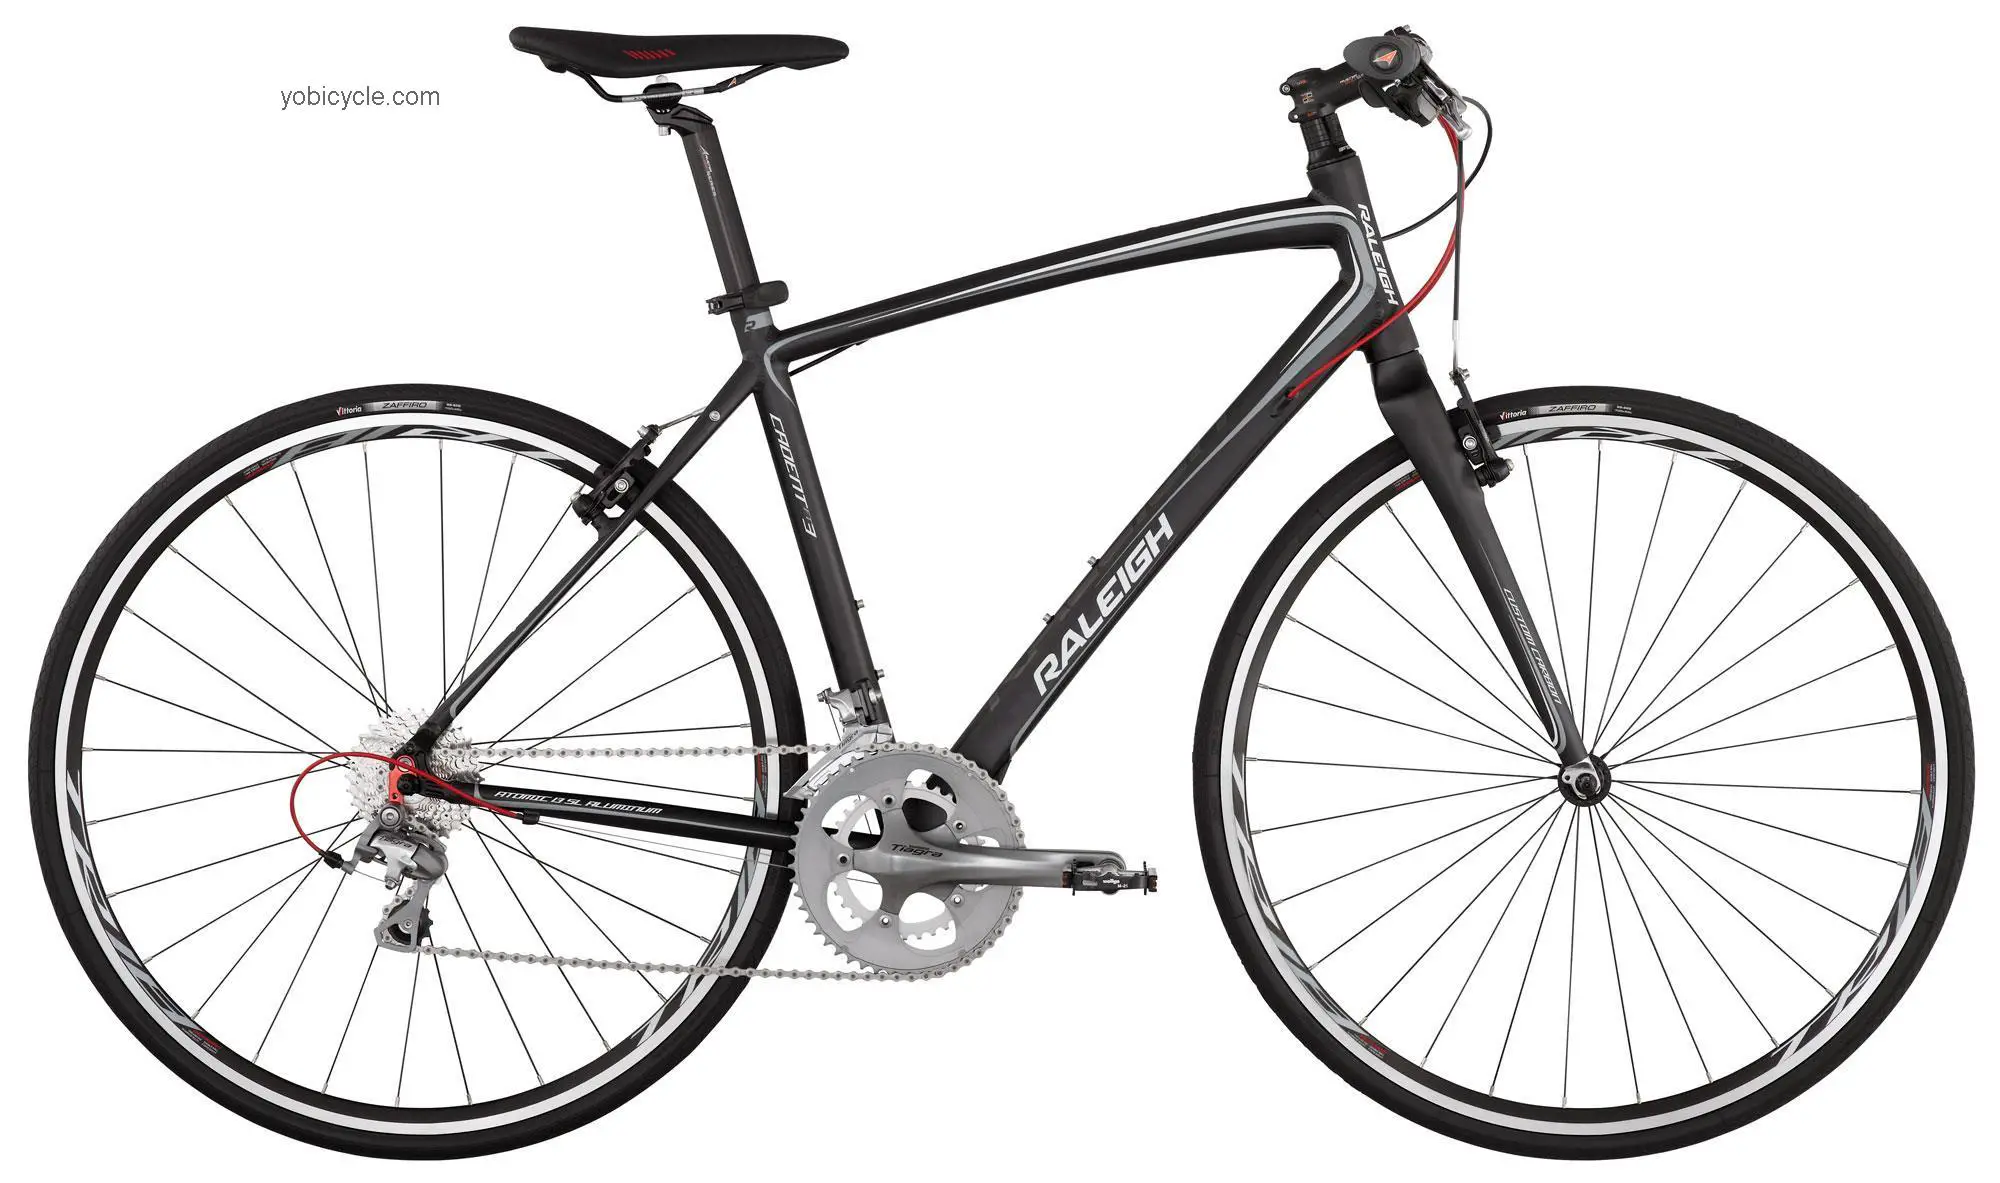 Raleigh Cadent FT3 2012 comparison online with competitors